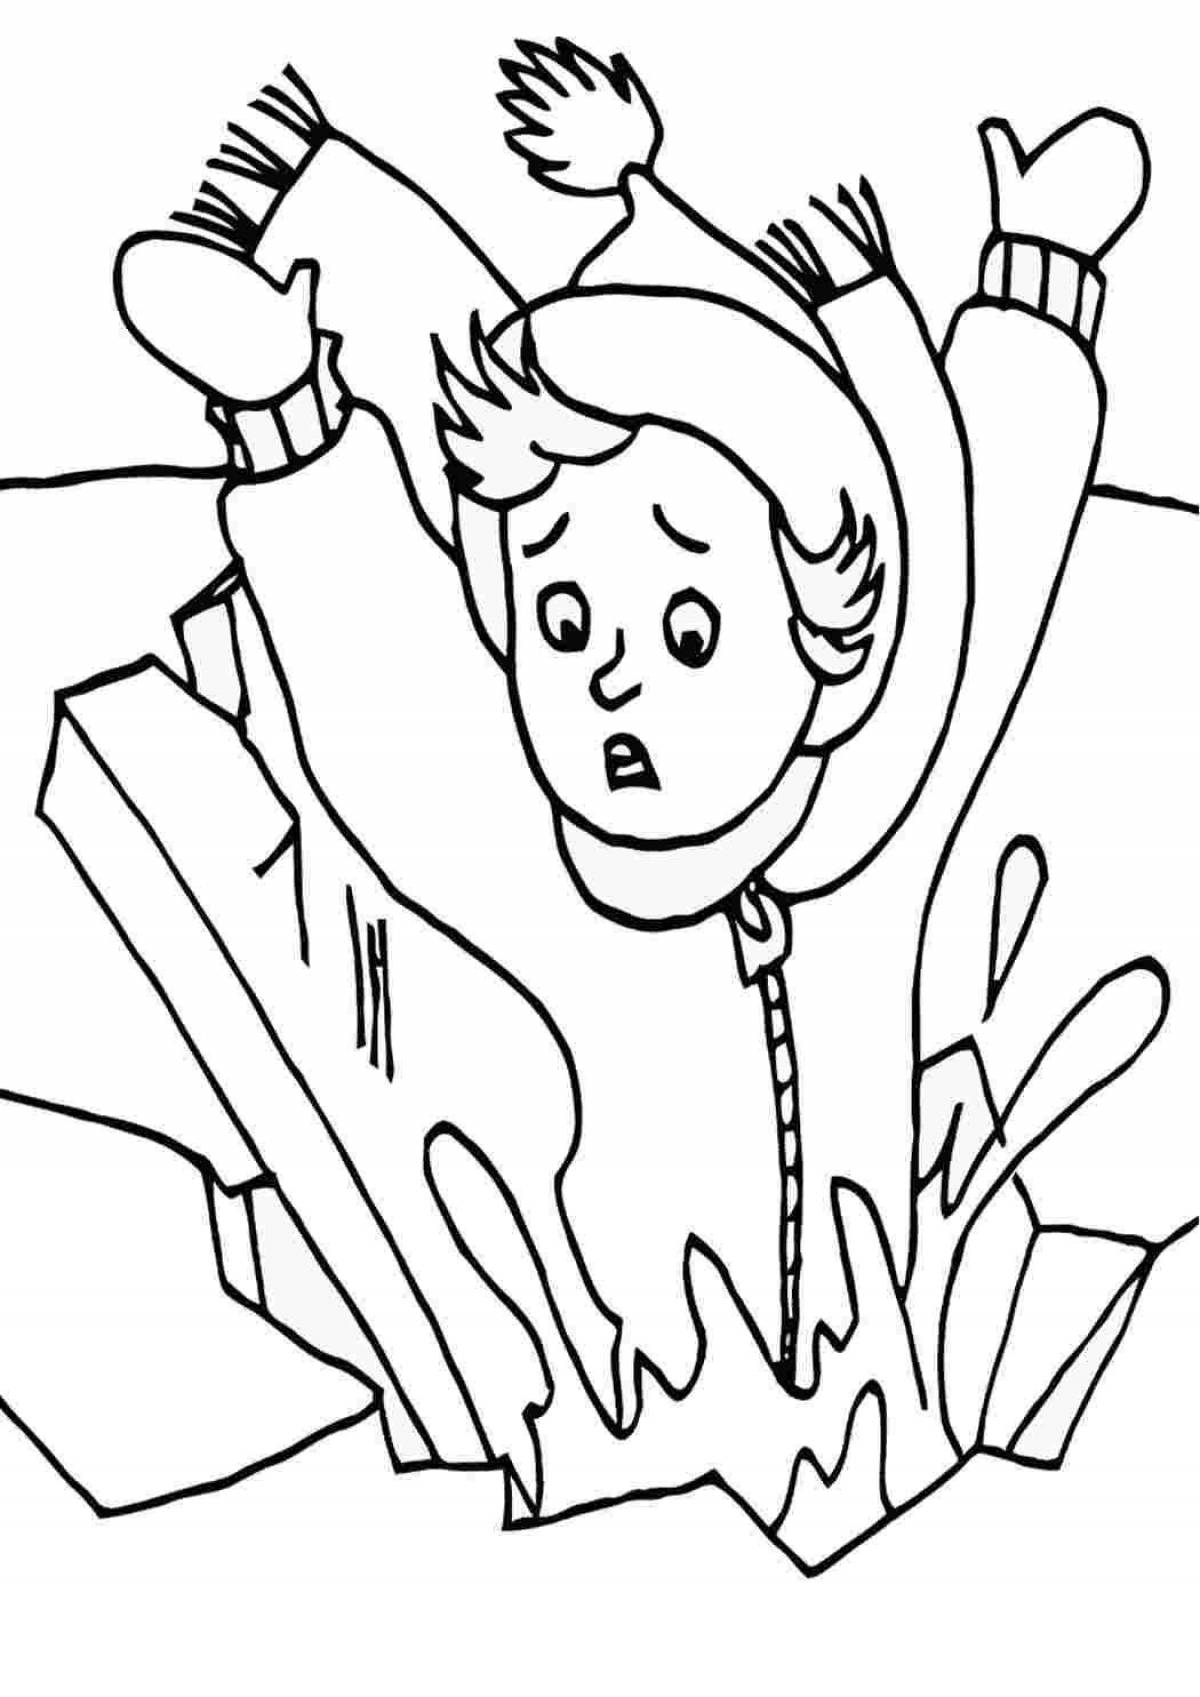 Amazing safe ice coloring page